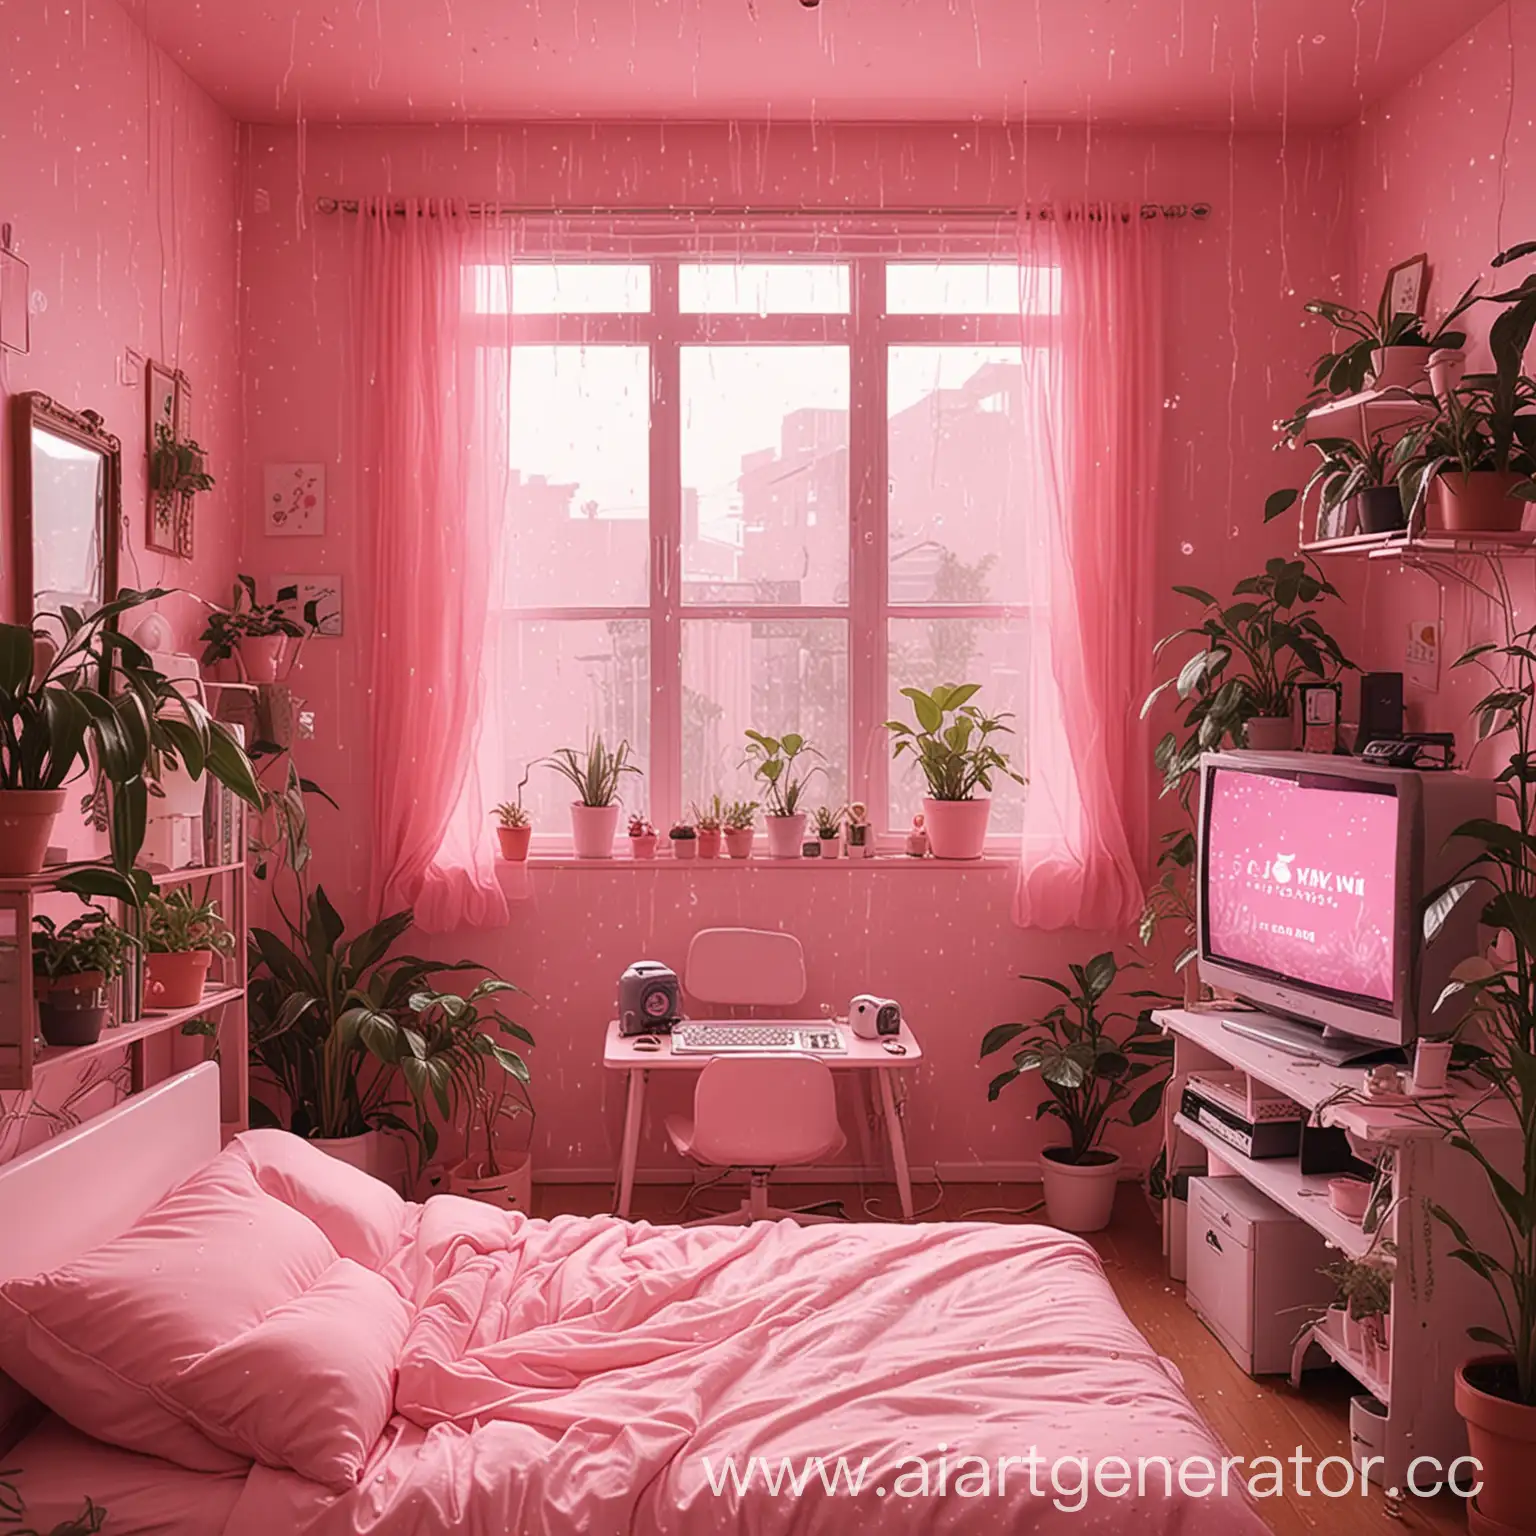 Cozy-Girlish-Pink-Room-with-Animeinspired-Decor-and-Rainy-Window-Ambiance